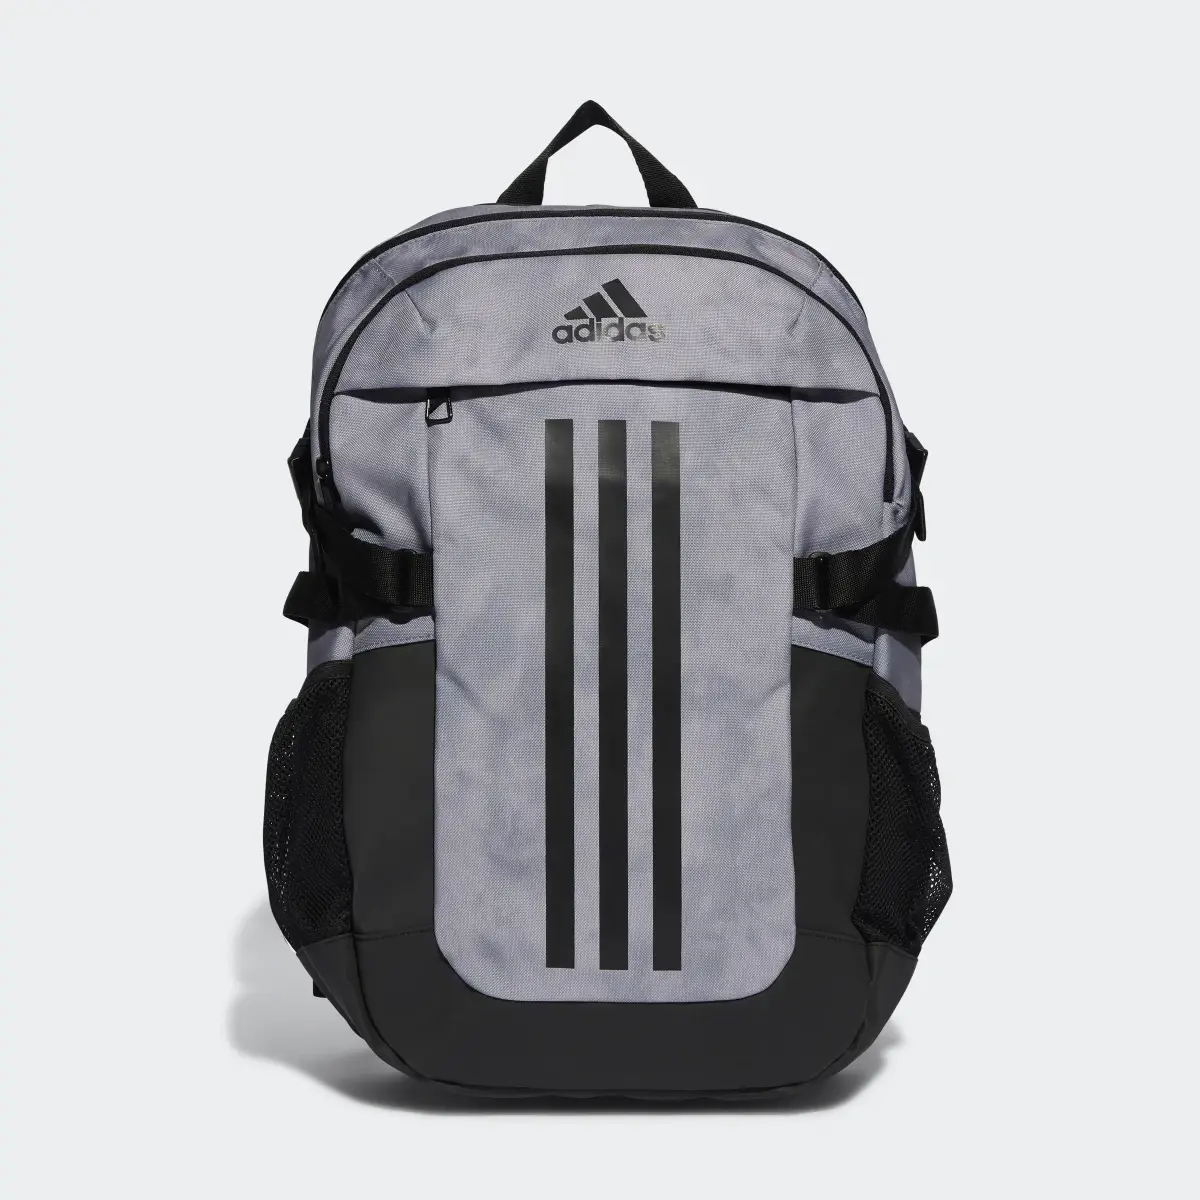 Adidas Power 6 Graphic Backpack. 2